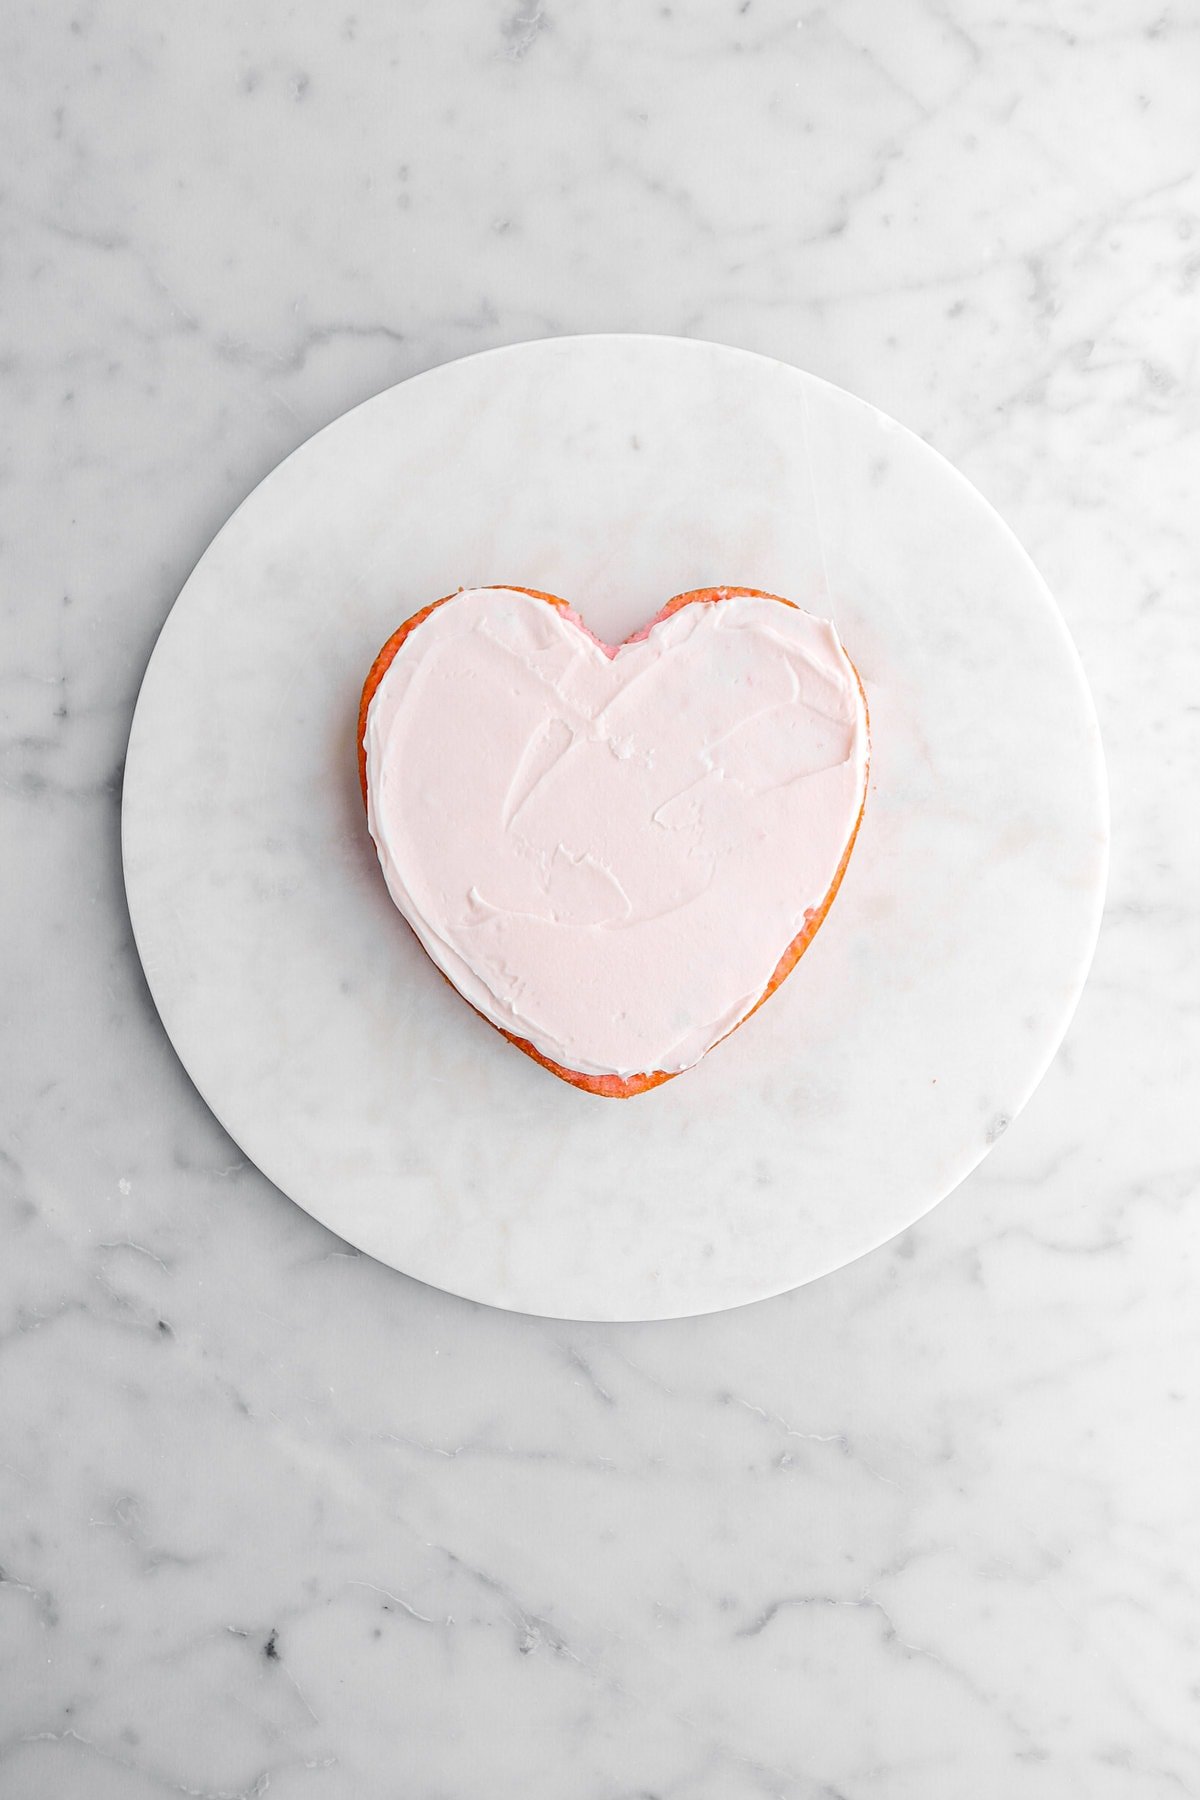 pink frosting spread across heart shaped cake.